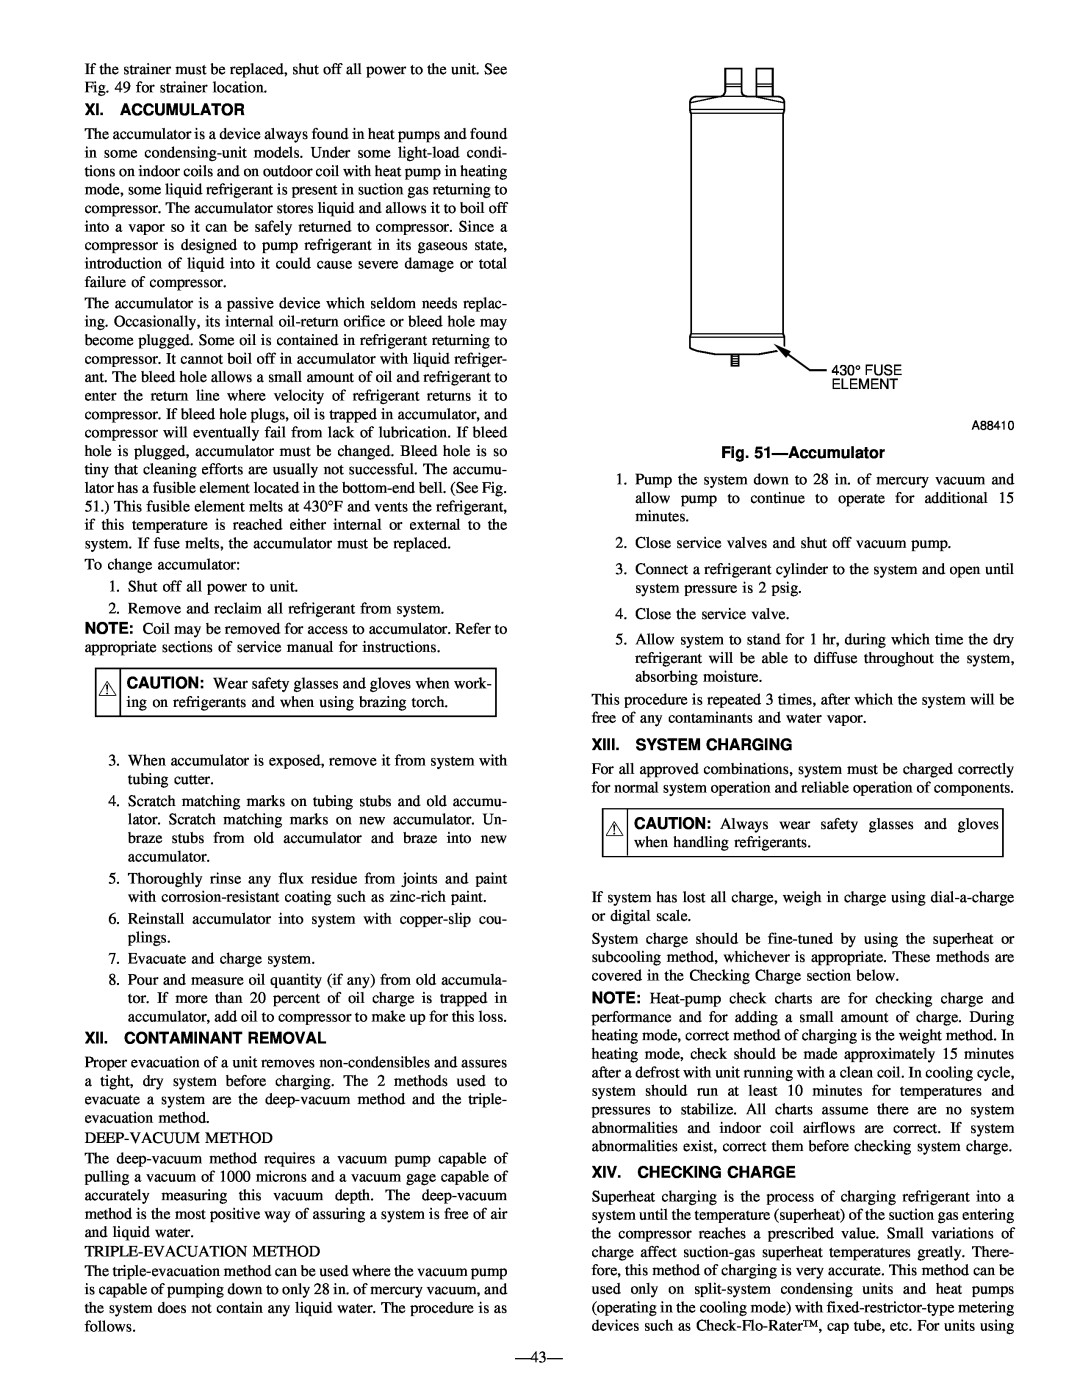 Bryant R-22 service manual Xi. Accumulator, Xii. Contaminant Removal, Xiii. System Charging, Xiv. Checking Charge 